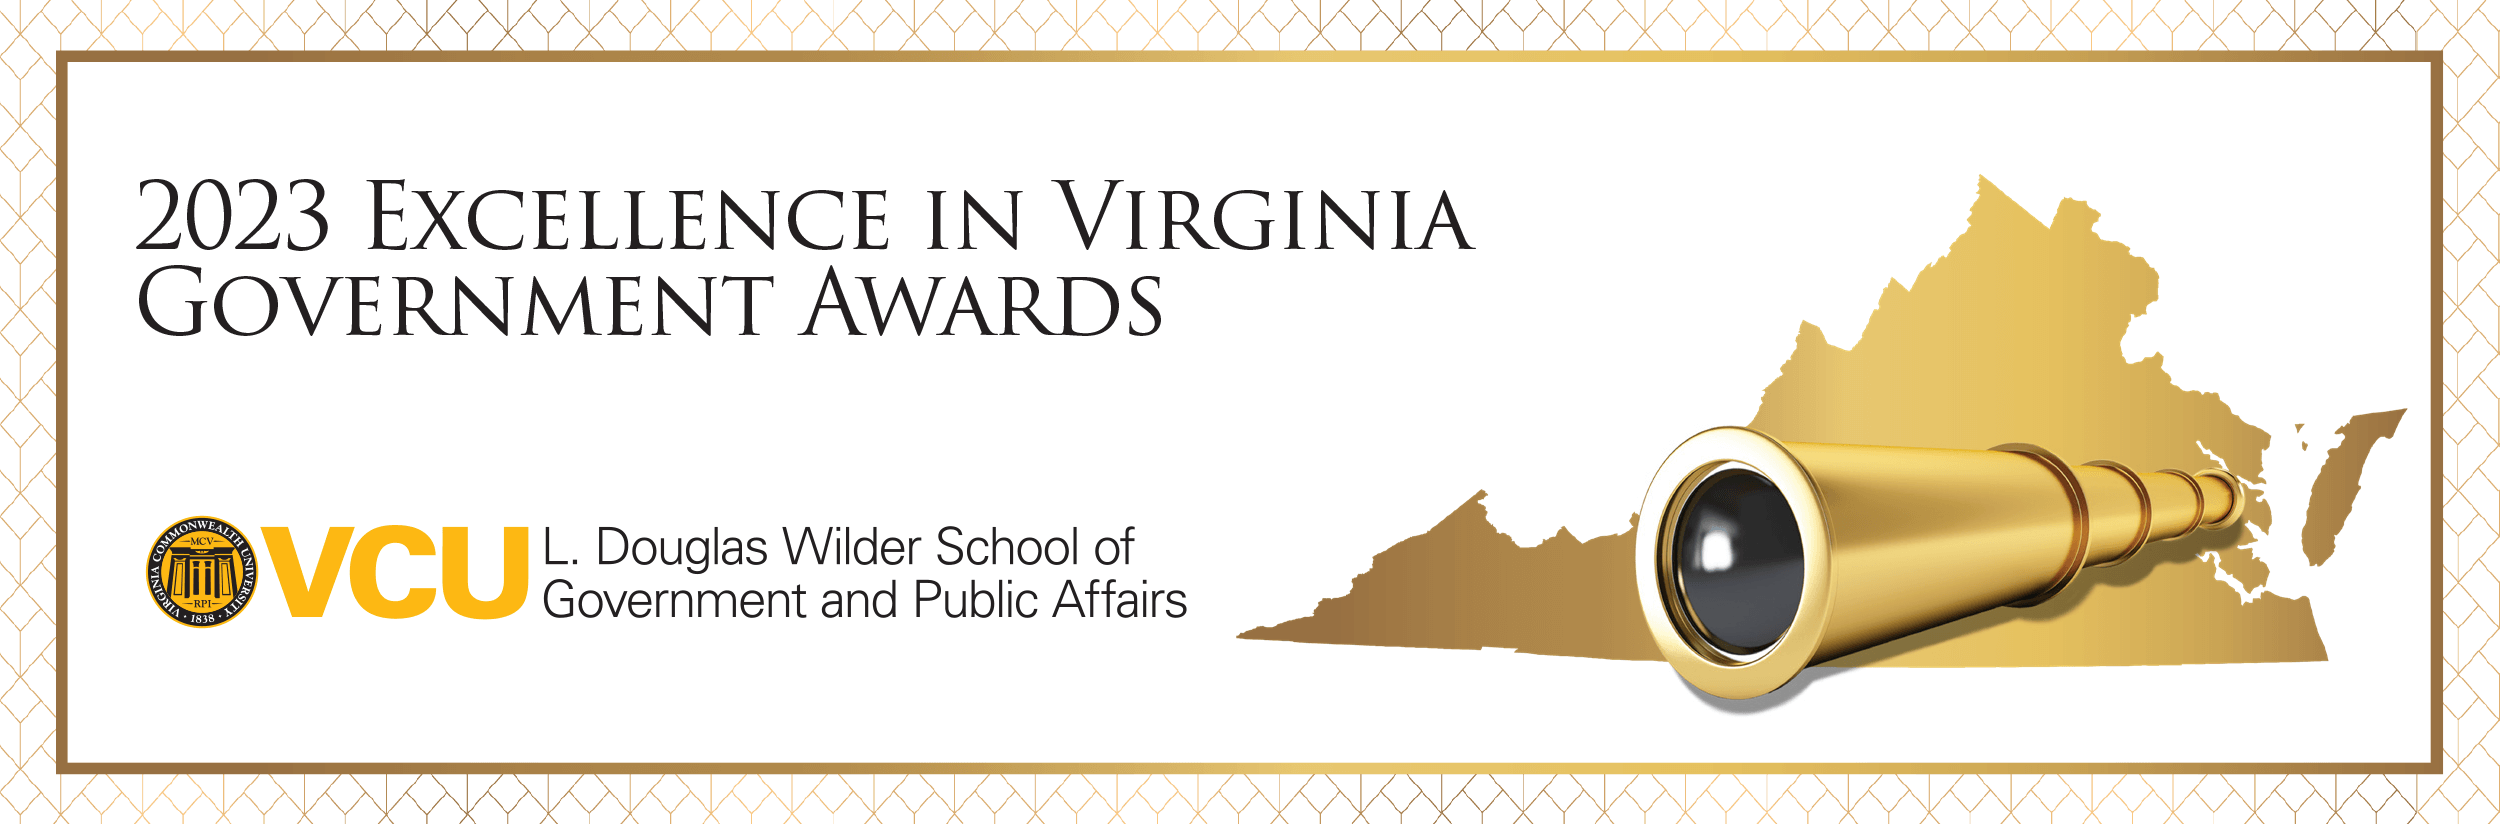 2023 Excellence in Virginia Government Awards